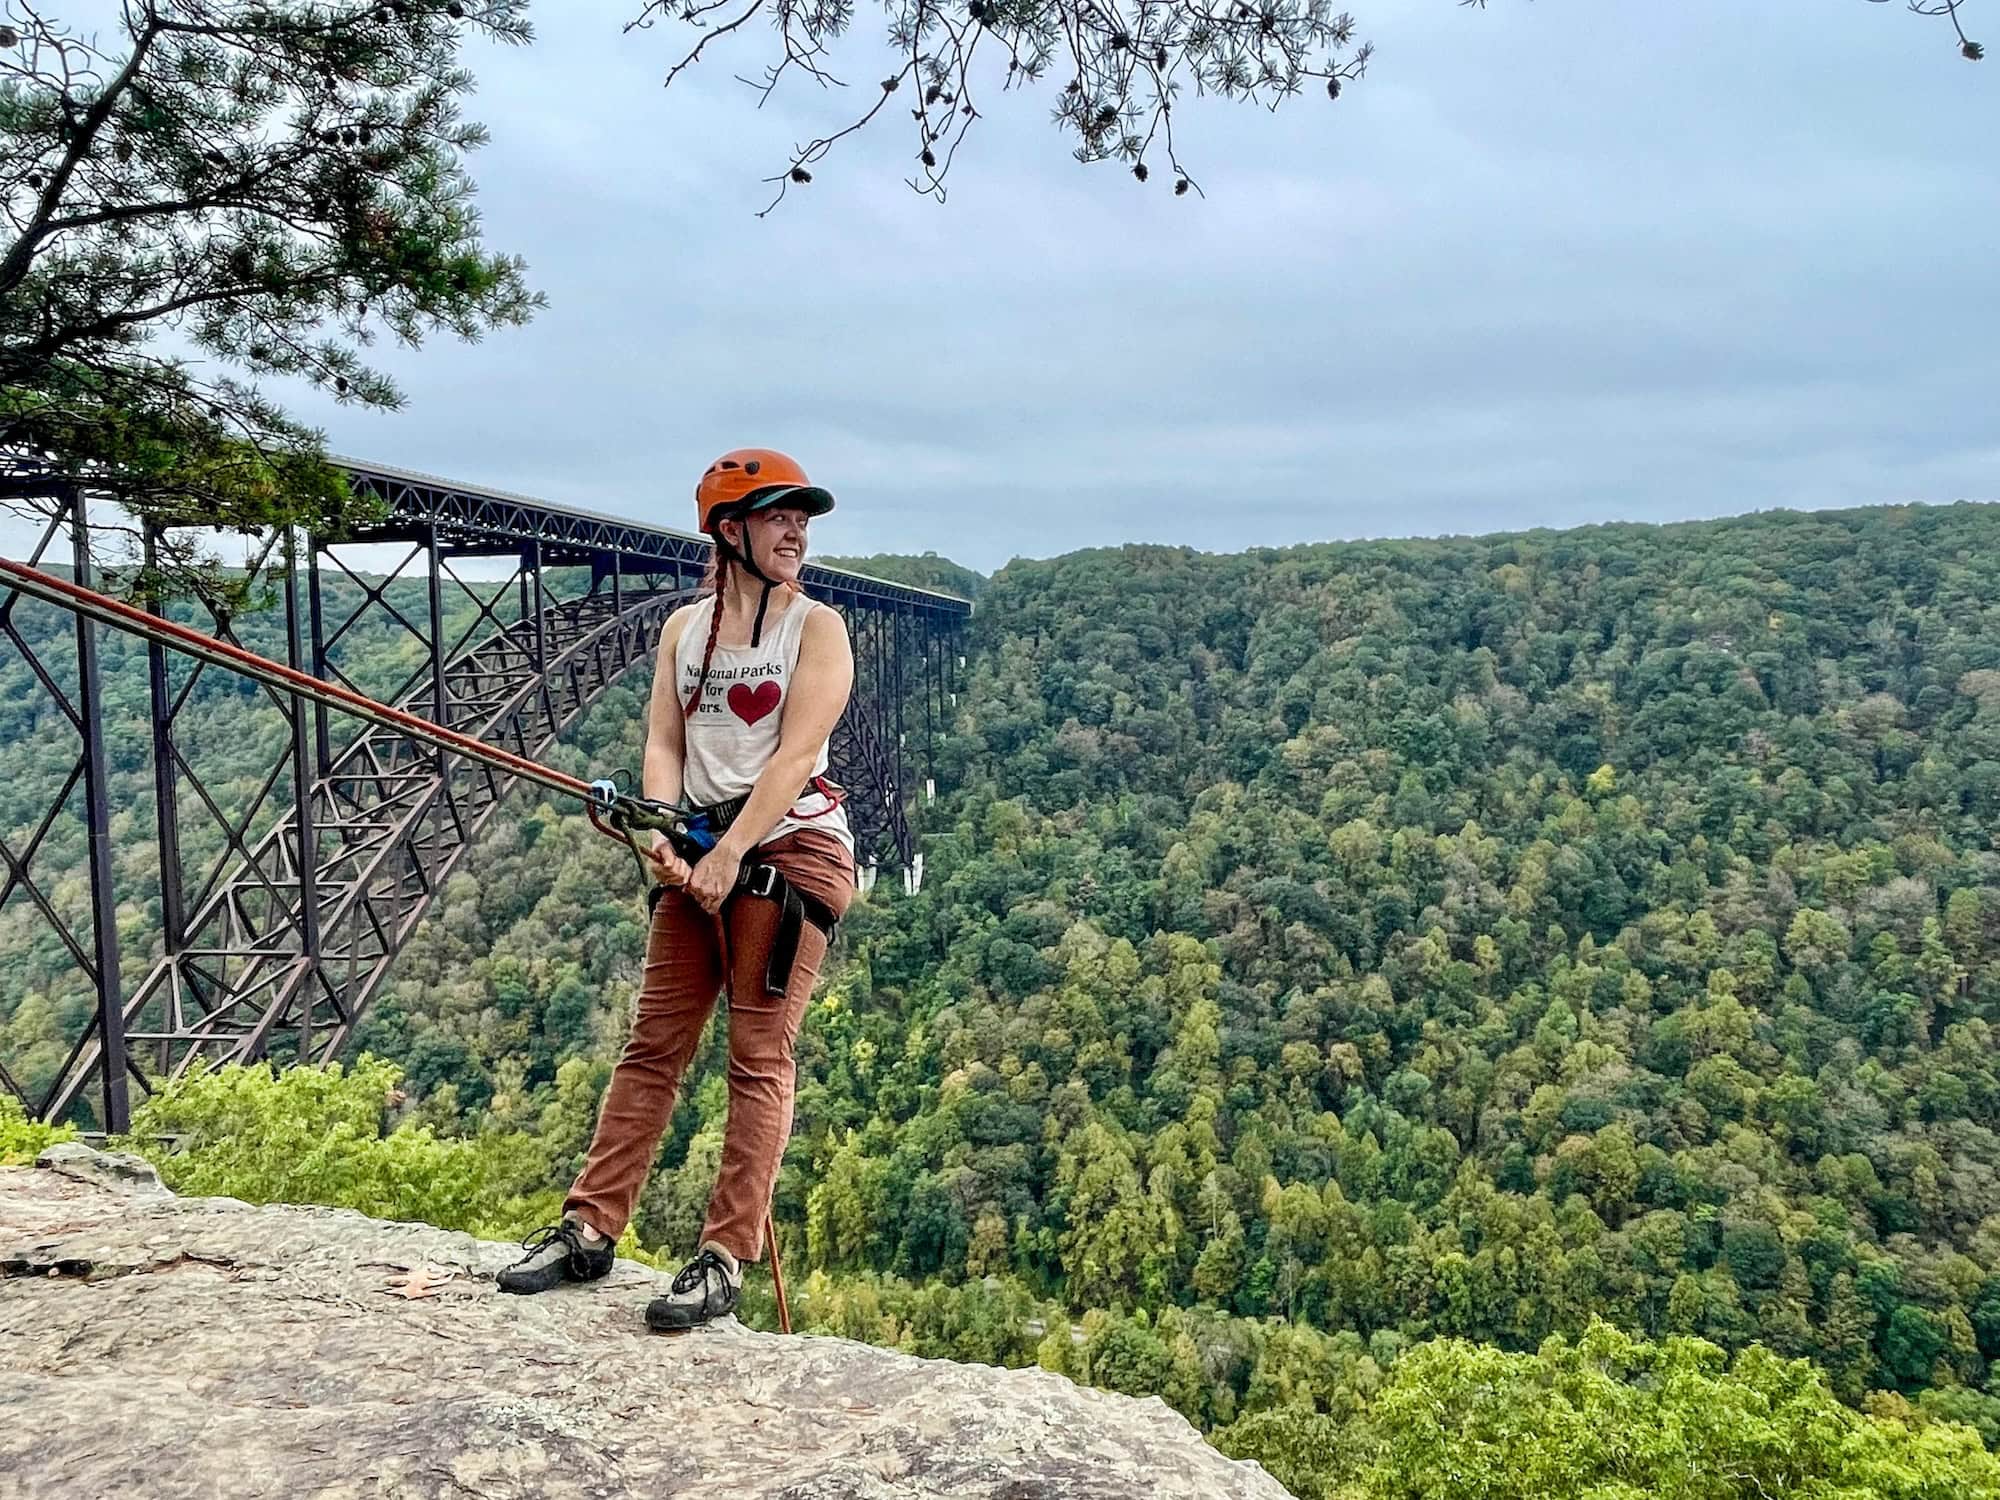 Emily Rappelling in New River Gorge